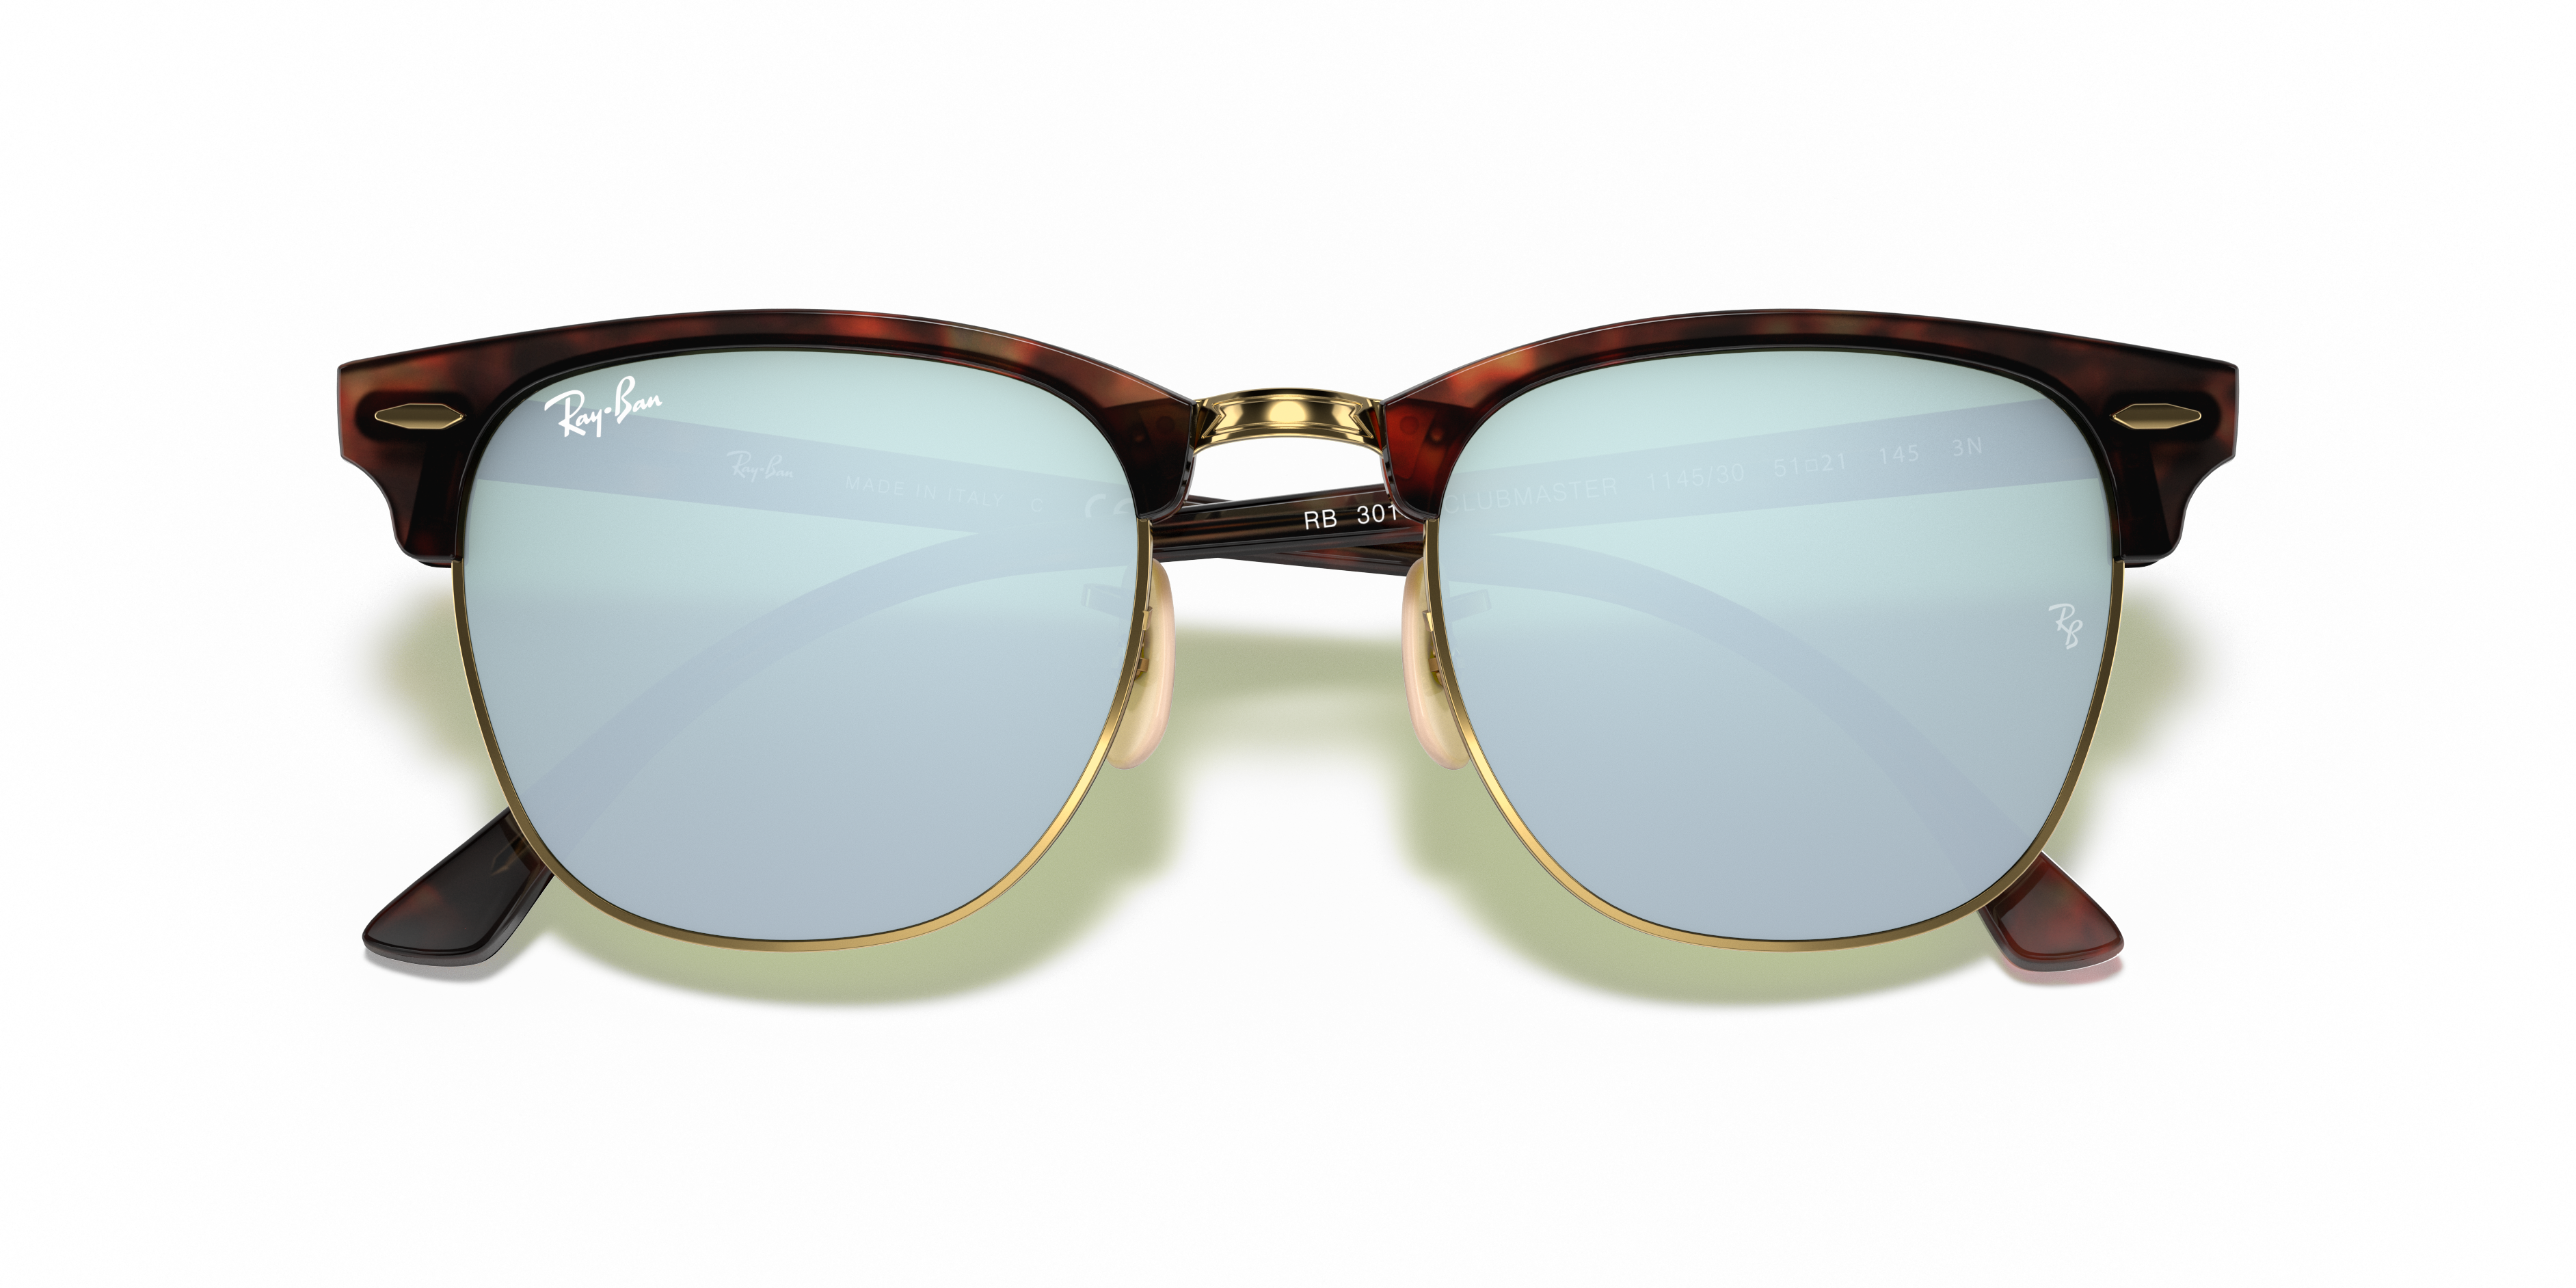 Clubmaster Flash Lenses Sunglasses in Havana On Gold and Silver 